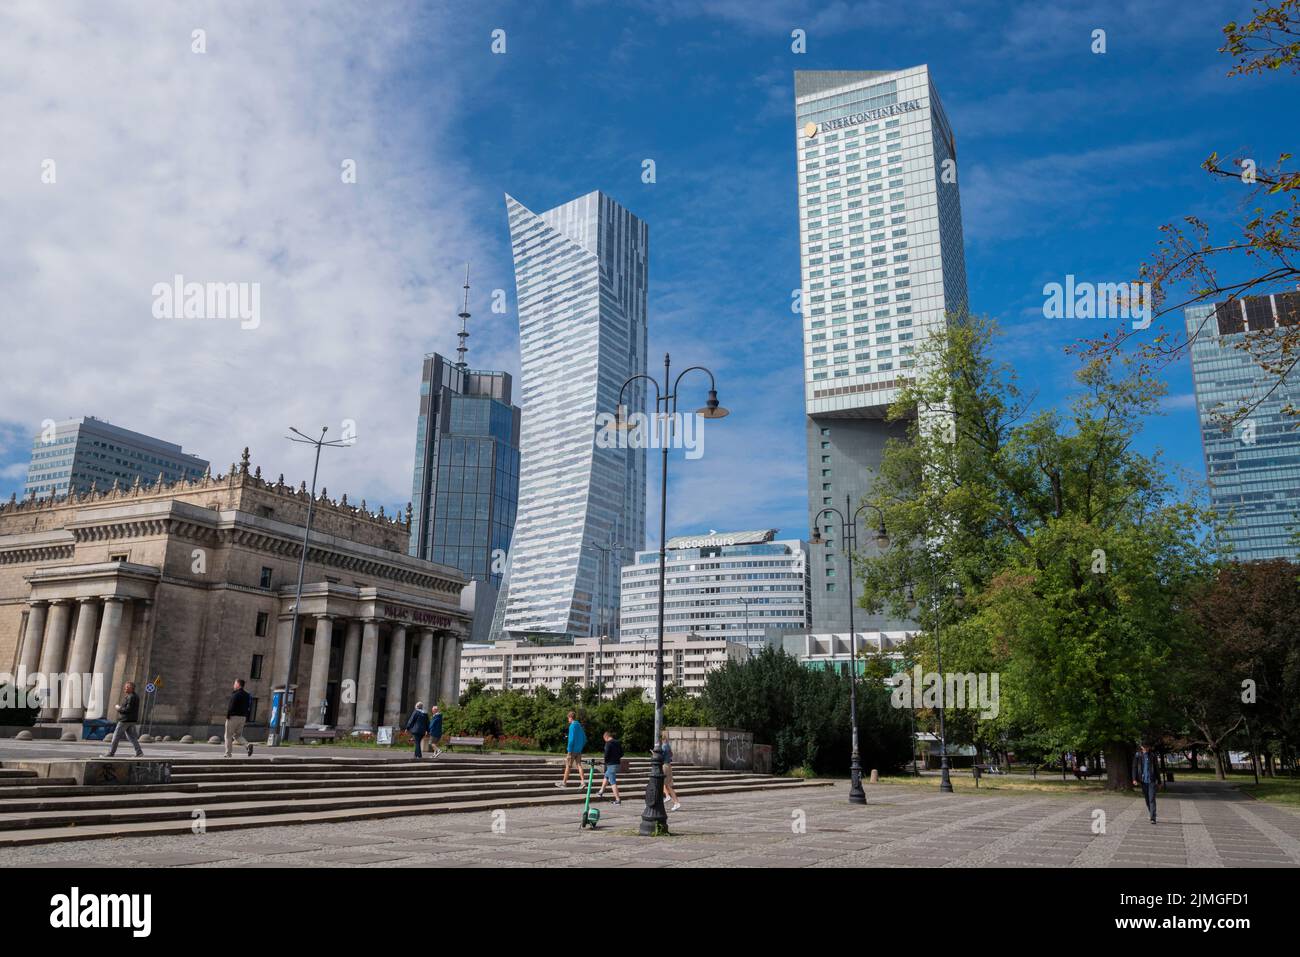 Warsaw Poland - January 2, 2021, view of skyscraper buildings in the city center of Warsaw Poland Stock Photo